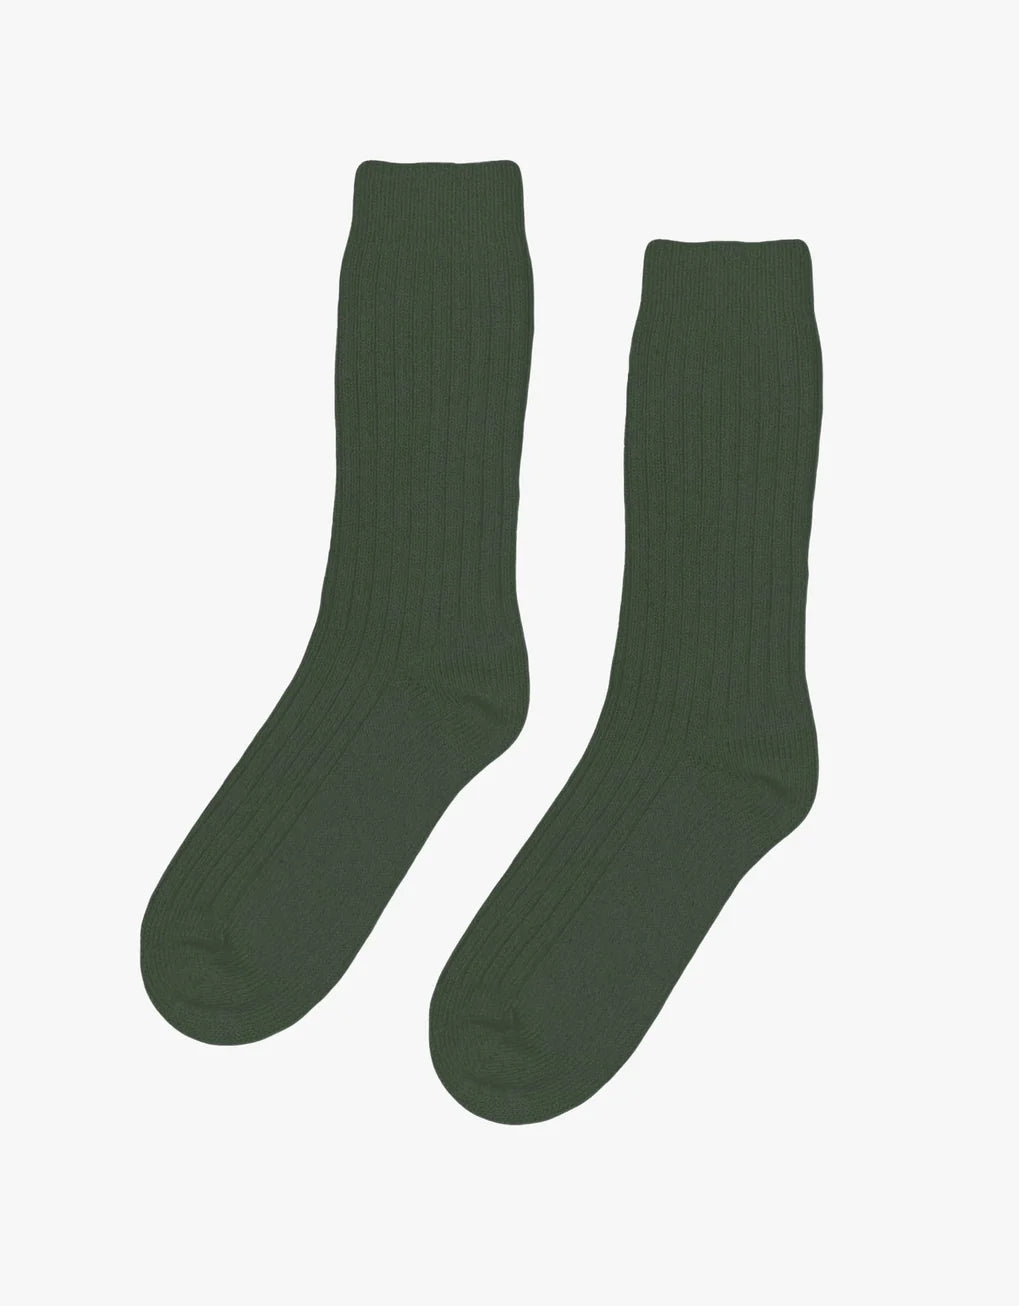 A pair of Colorful Standard Merino Wool Blend Socks made with recycled fibers on a white background.